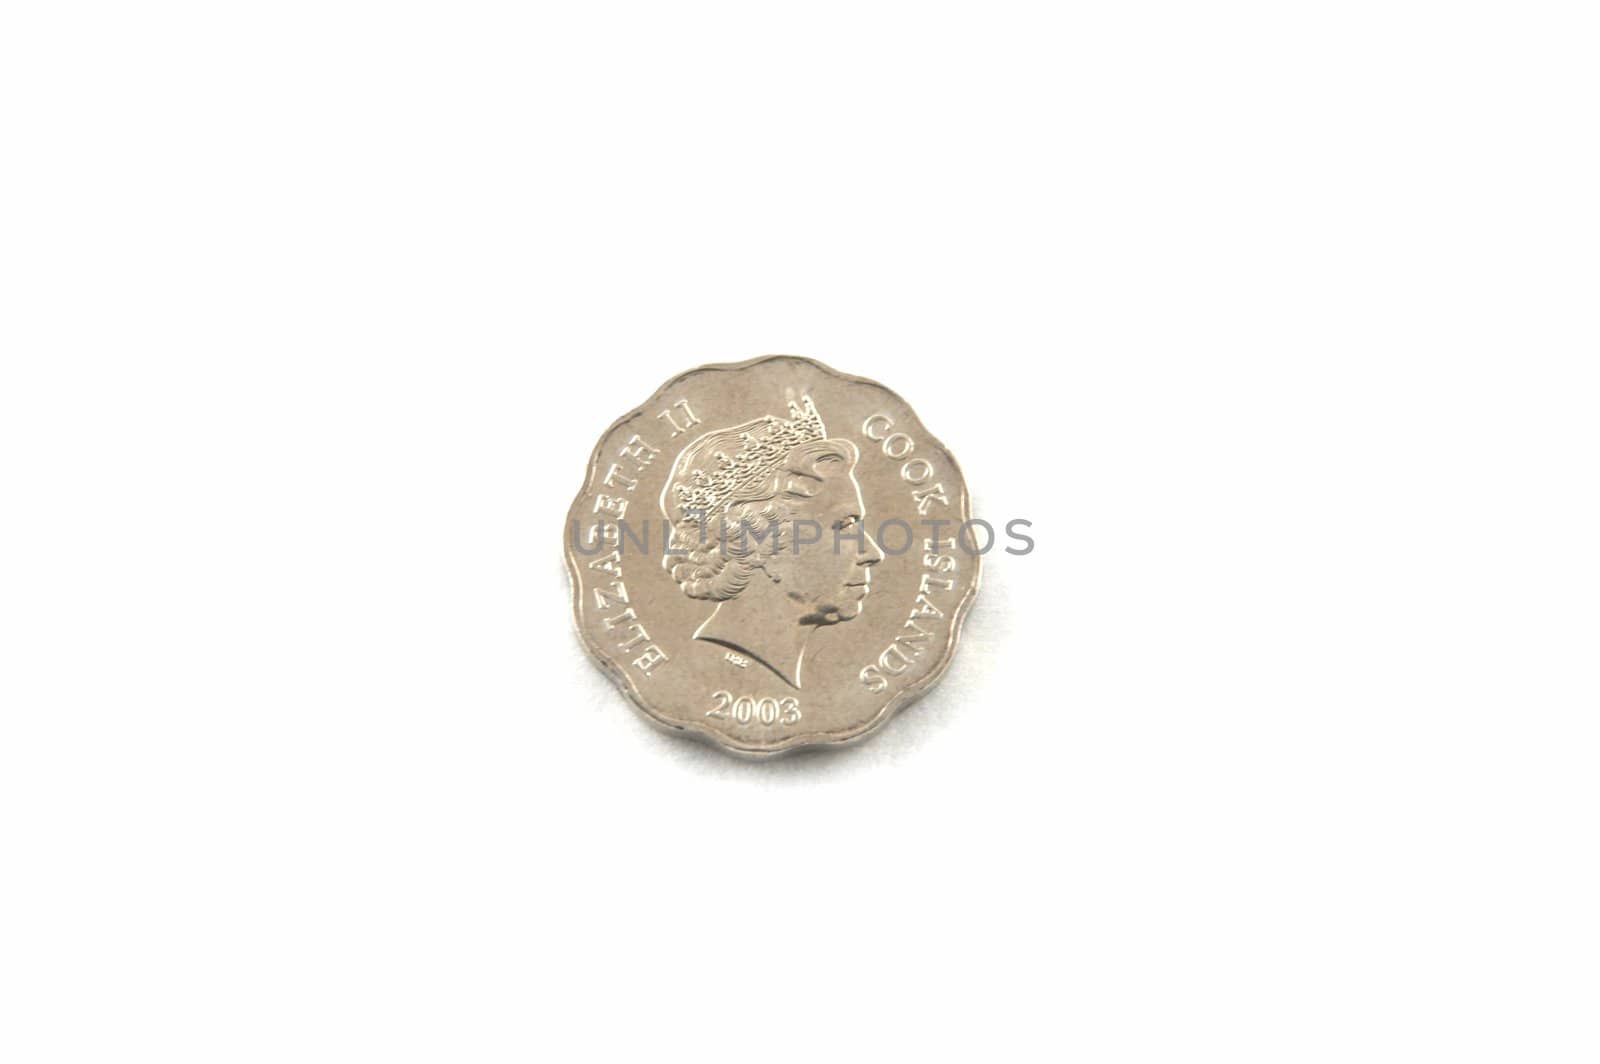 Coins of Cook islands on a white background